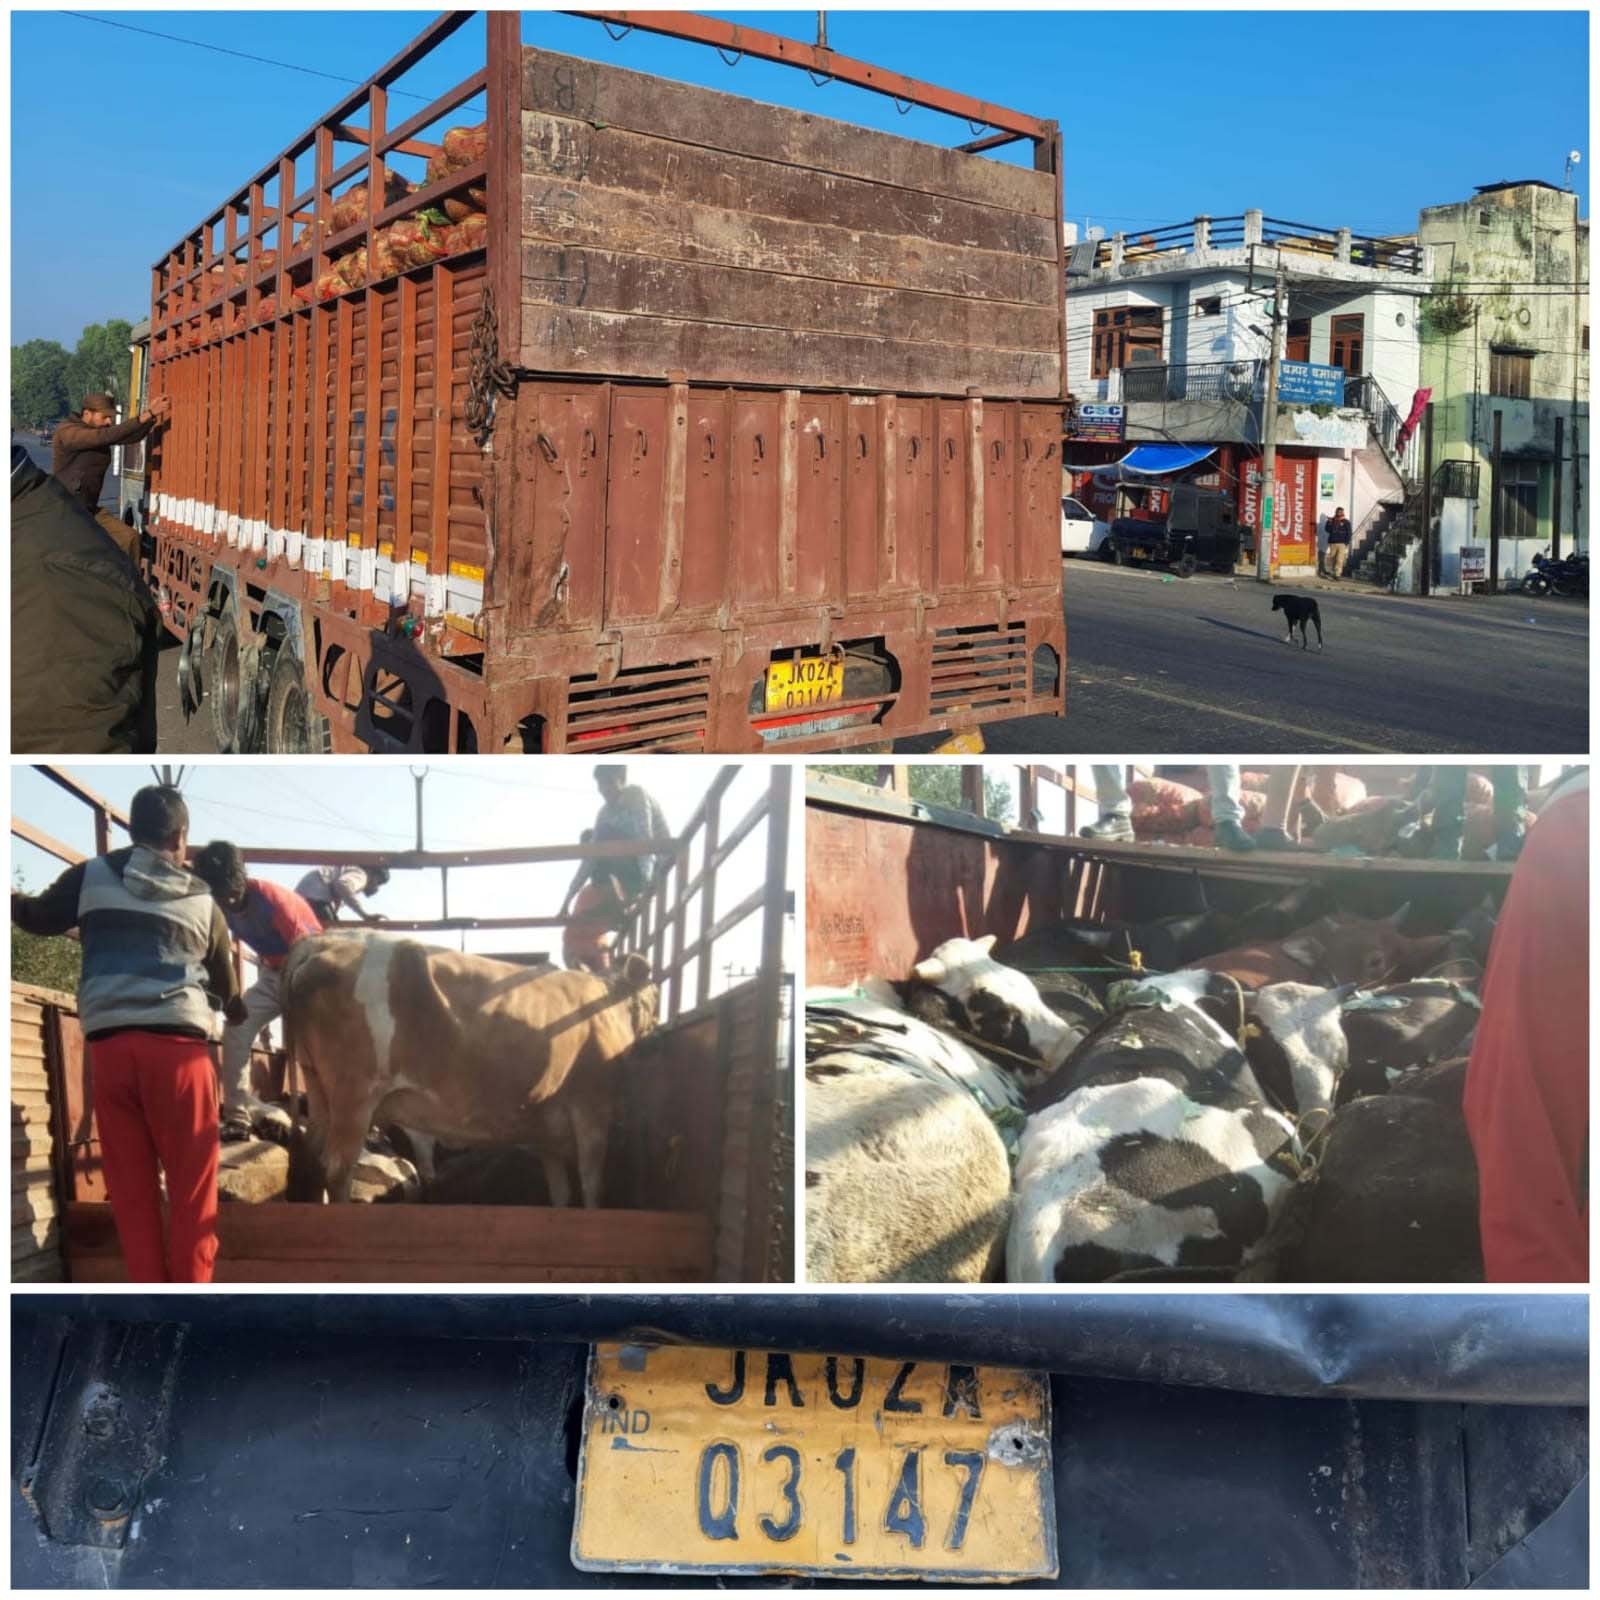 Bid to smuggle bovines foiled by Kathua police; 19 bovines rescued seized  01 vehicle involved